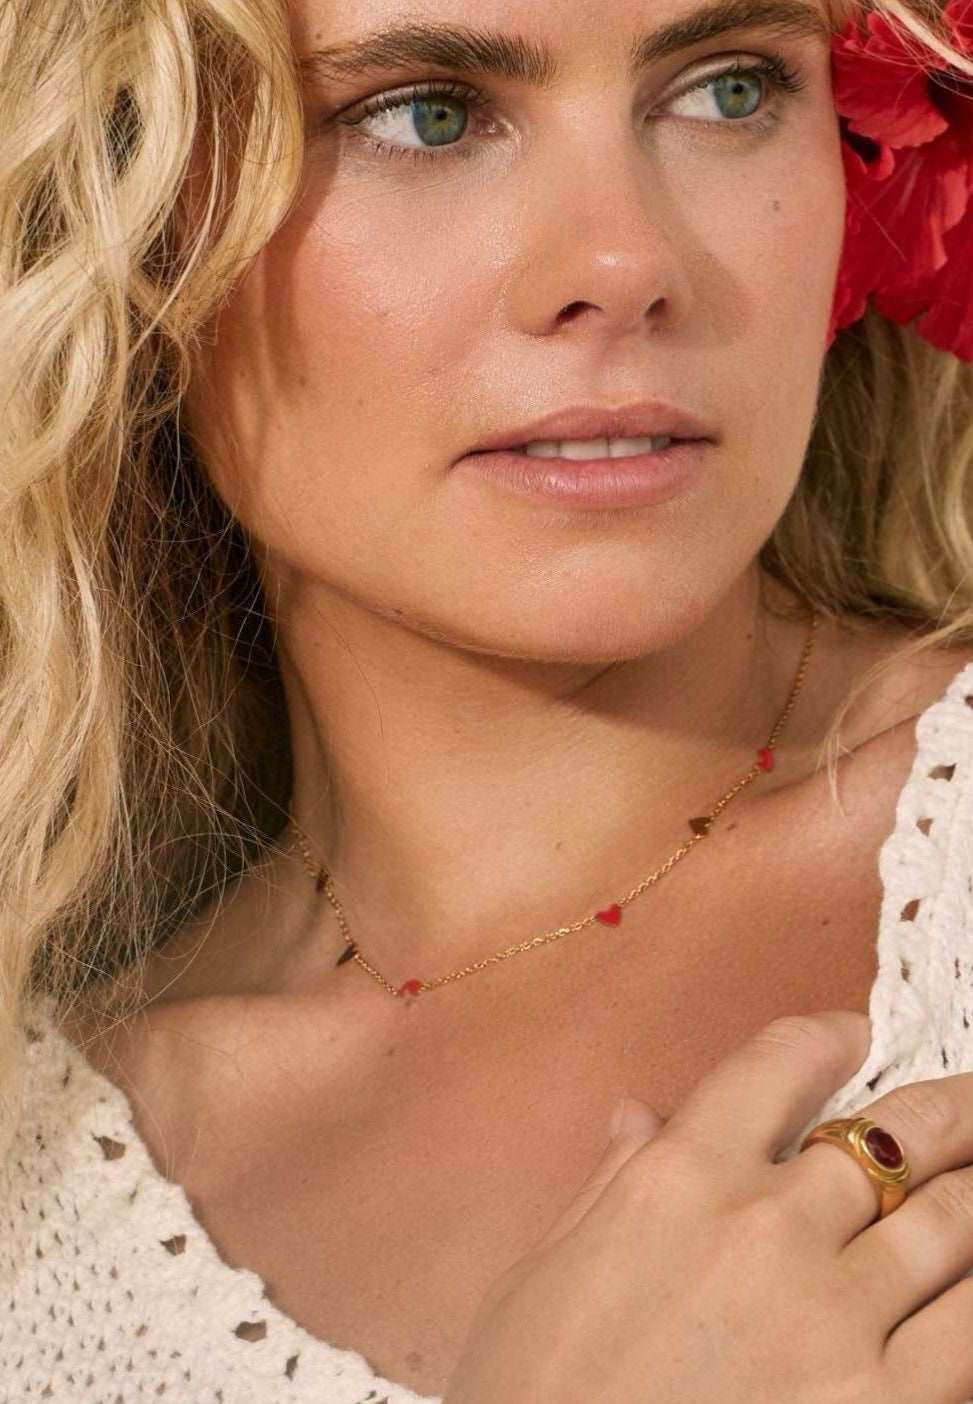 Red heart earrings and necklace set